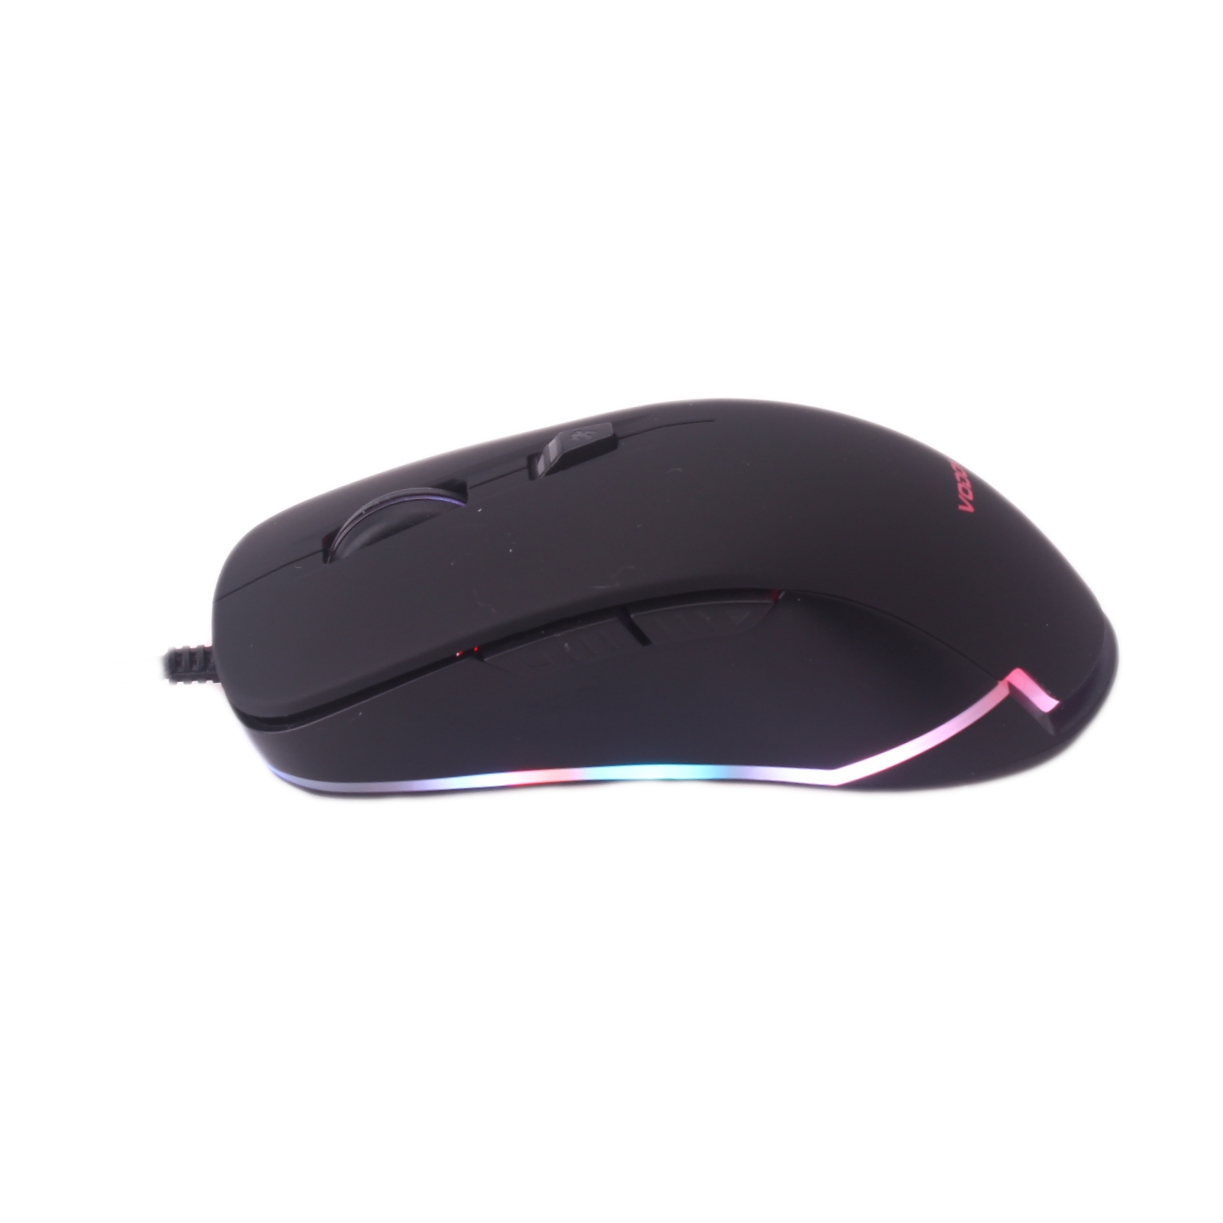 Computer Gaming Mouse, with Lighting Belt At The Bottom of The Housing Case